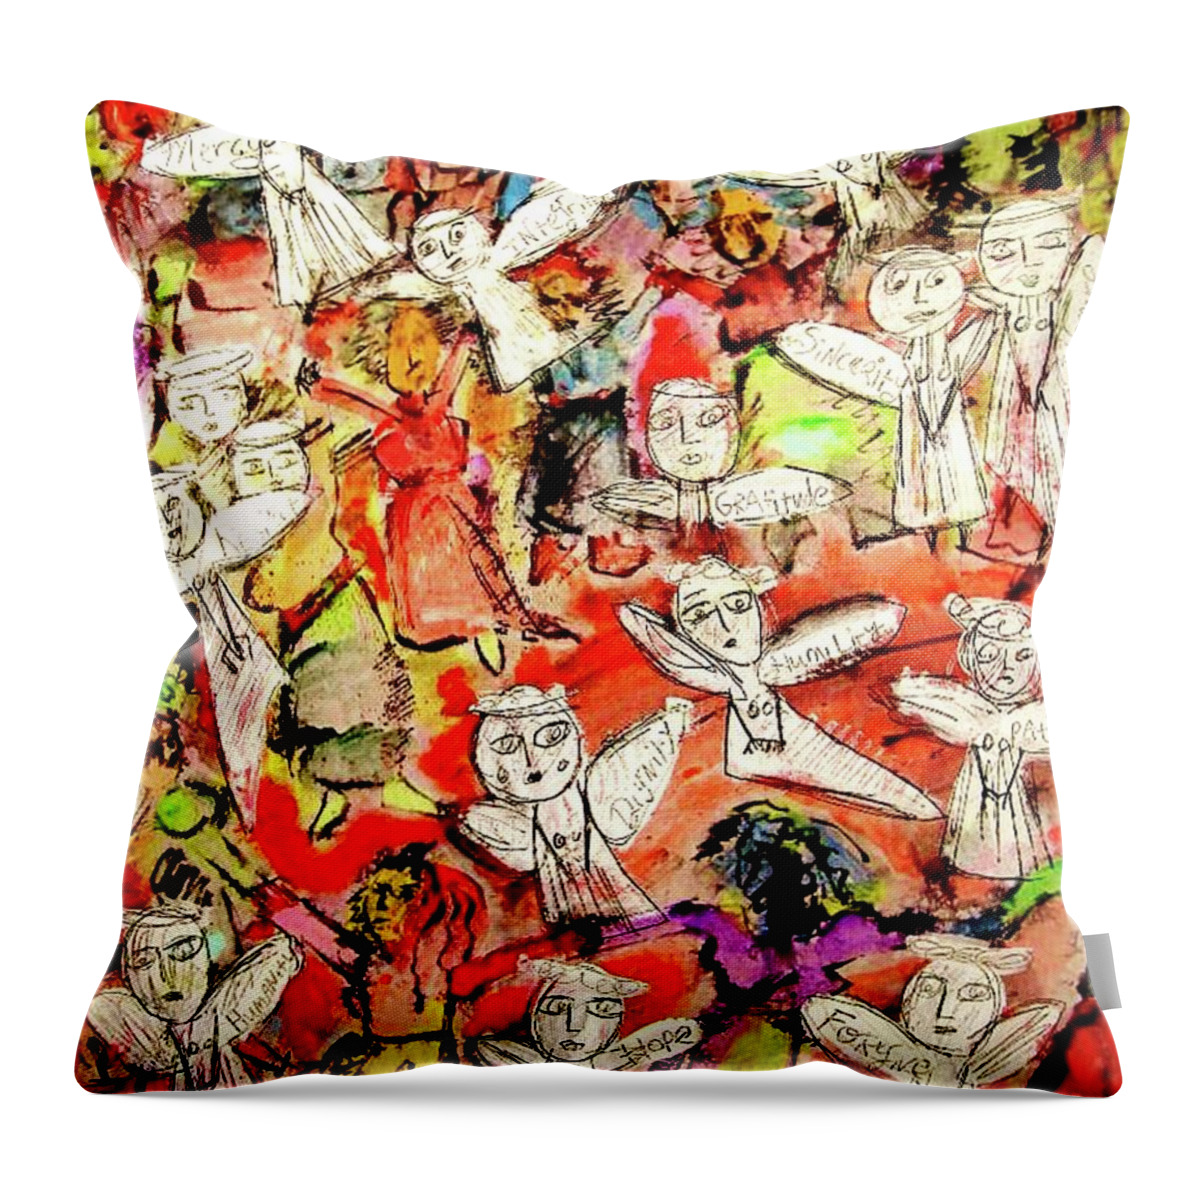 Sandra Silberzweig Throw Pillow featuring the painting Angels Rejoice Among Us by Sandra Silberzweig